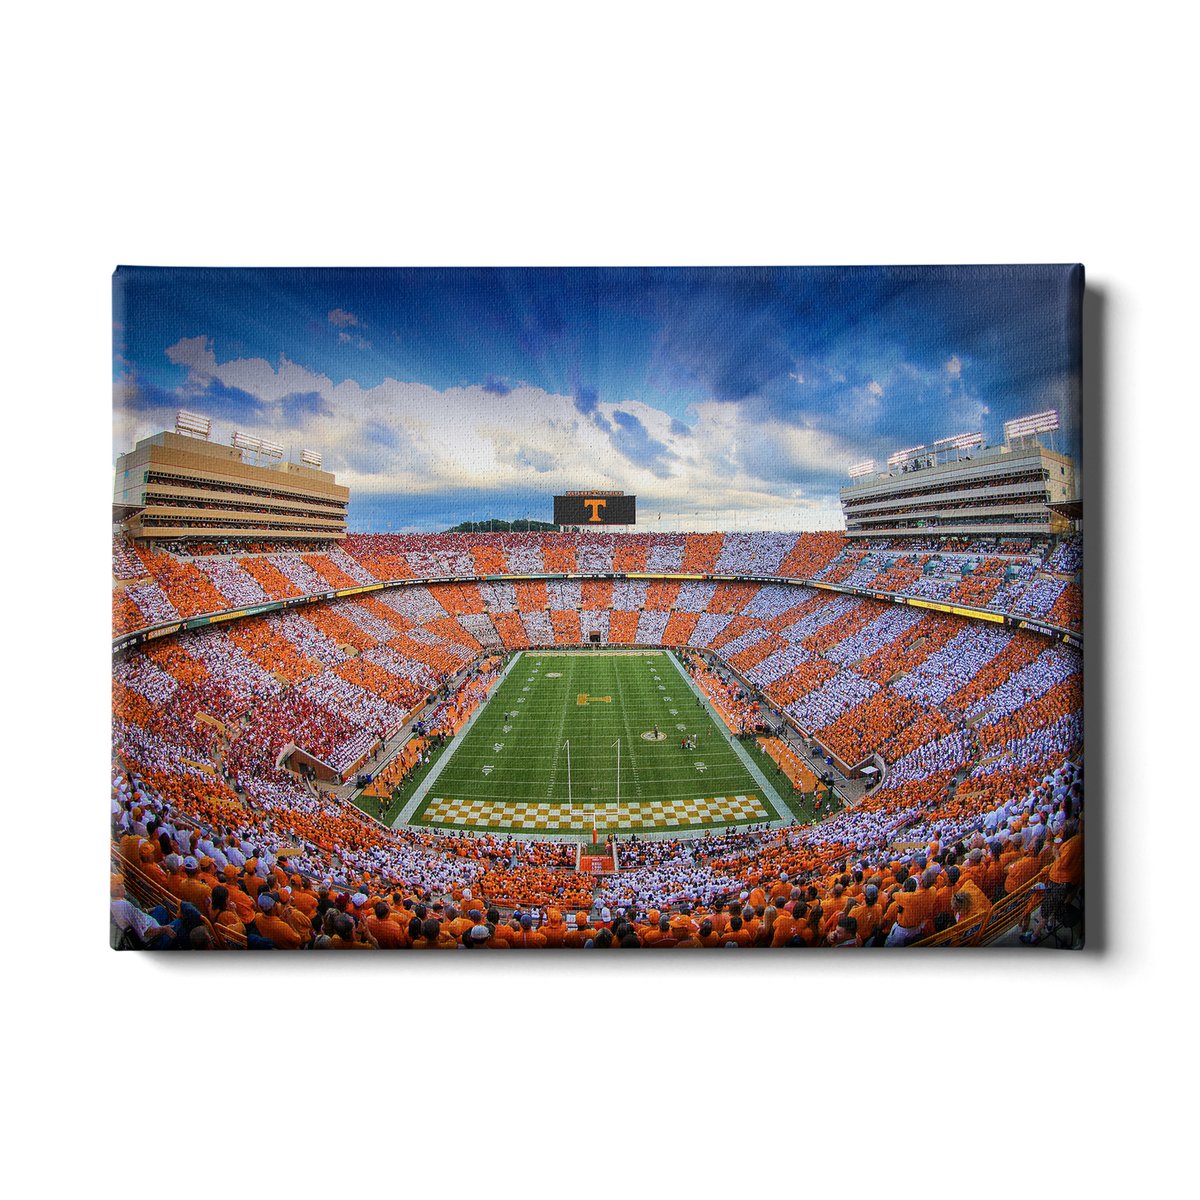 Sunset Shot of Neyland Stadium. See more Tennessee Volunteer images at collegewallart.com. Now you can enjoy Free Shipping in the US.